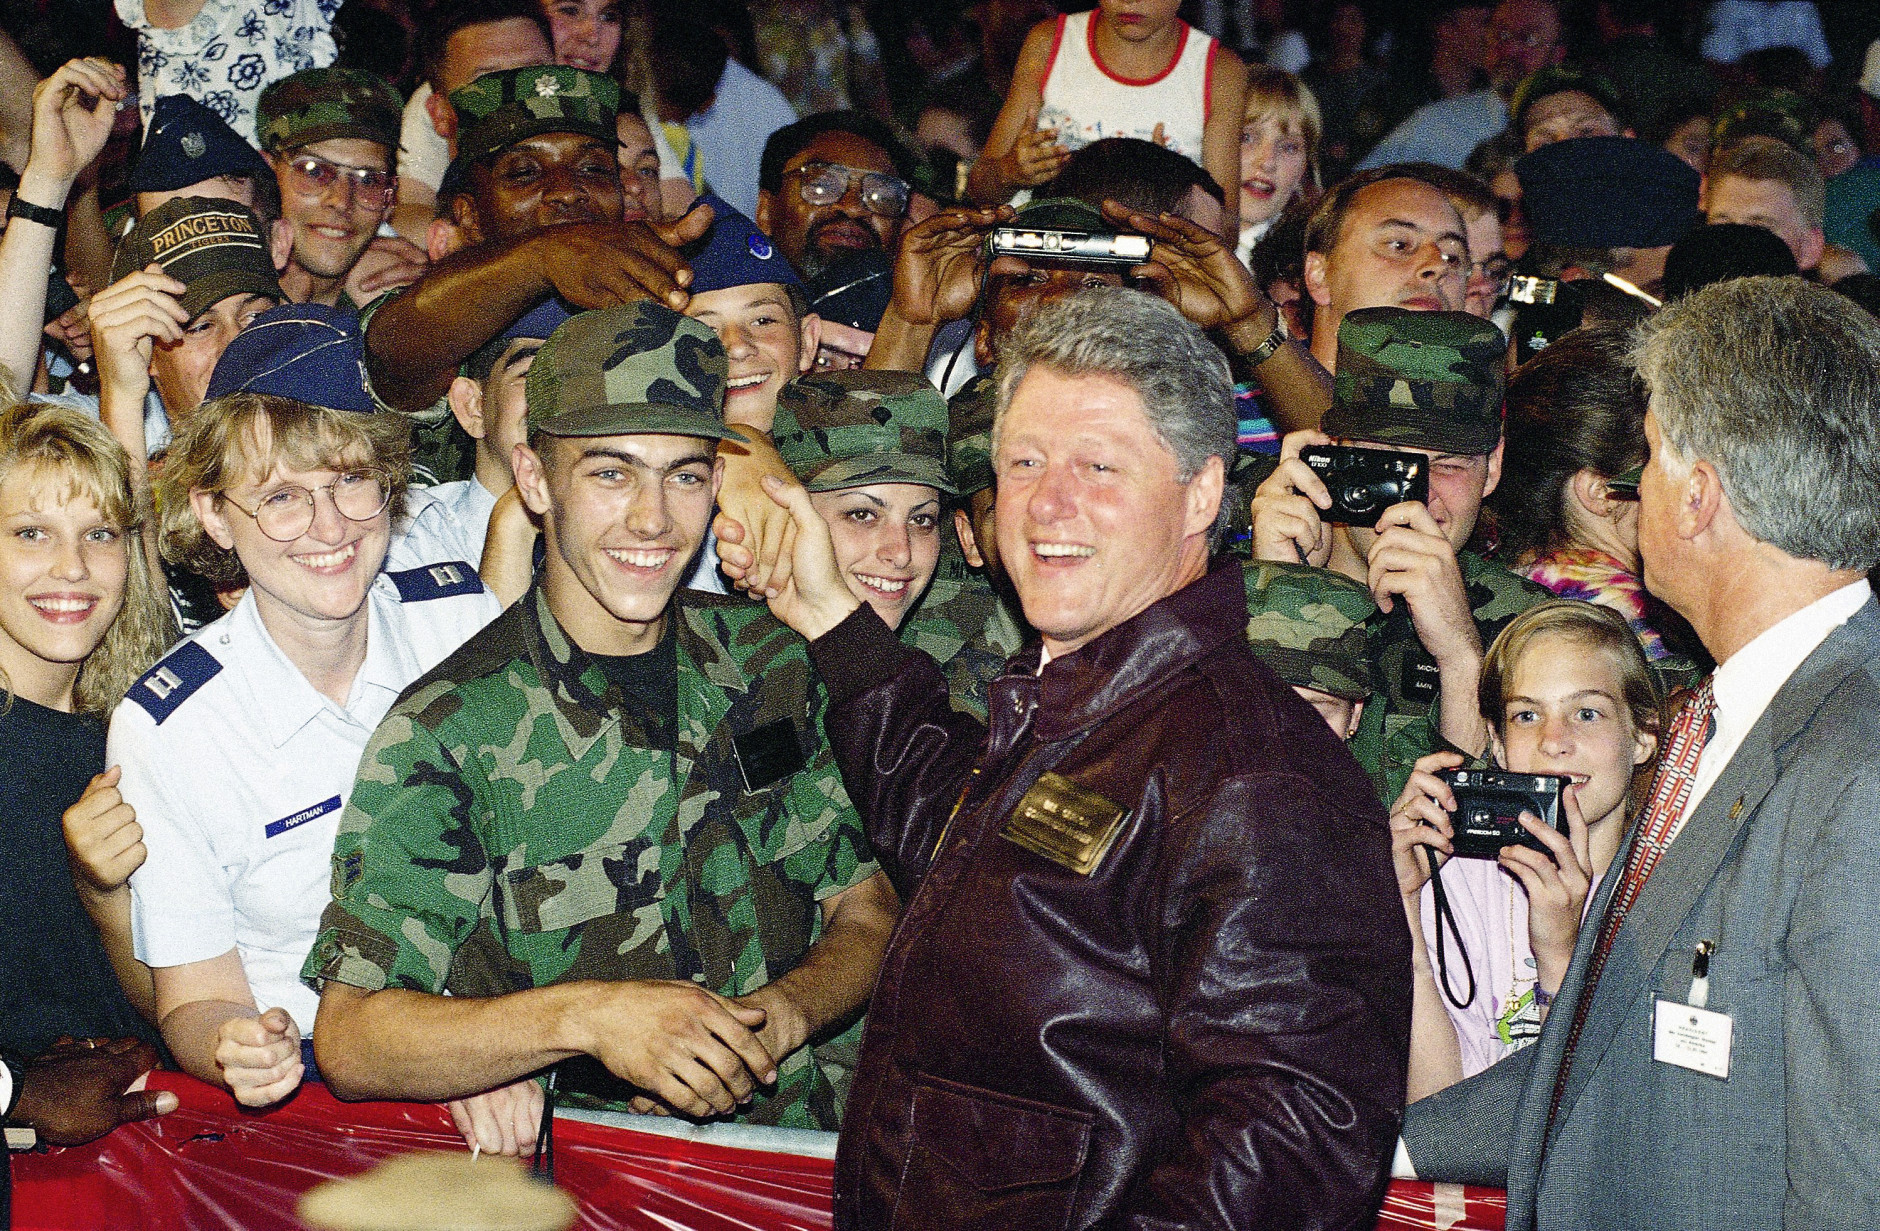 Wearing a leather jacket inscribed with his name and title and given to him by local personnel, President Bill Clinton meets with members of the American Armed Forces gathered at the Ramstein Air Force Base in Berlin, July 11, 1994. In a speech, President Bill Clinton promised there would be no further cuts in defense spending and that U.S. troops would remain in Europe. (AP Photo/Marcy Nighswander)